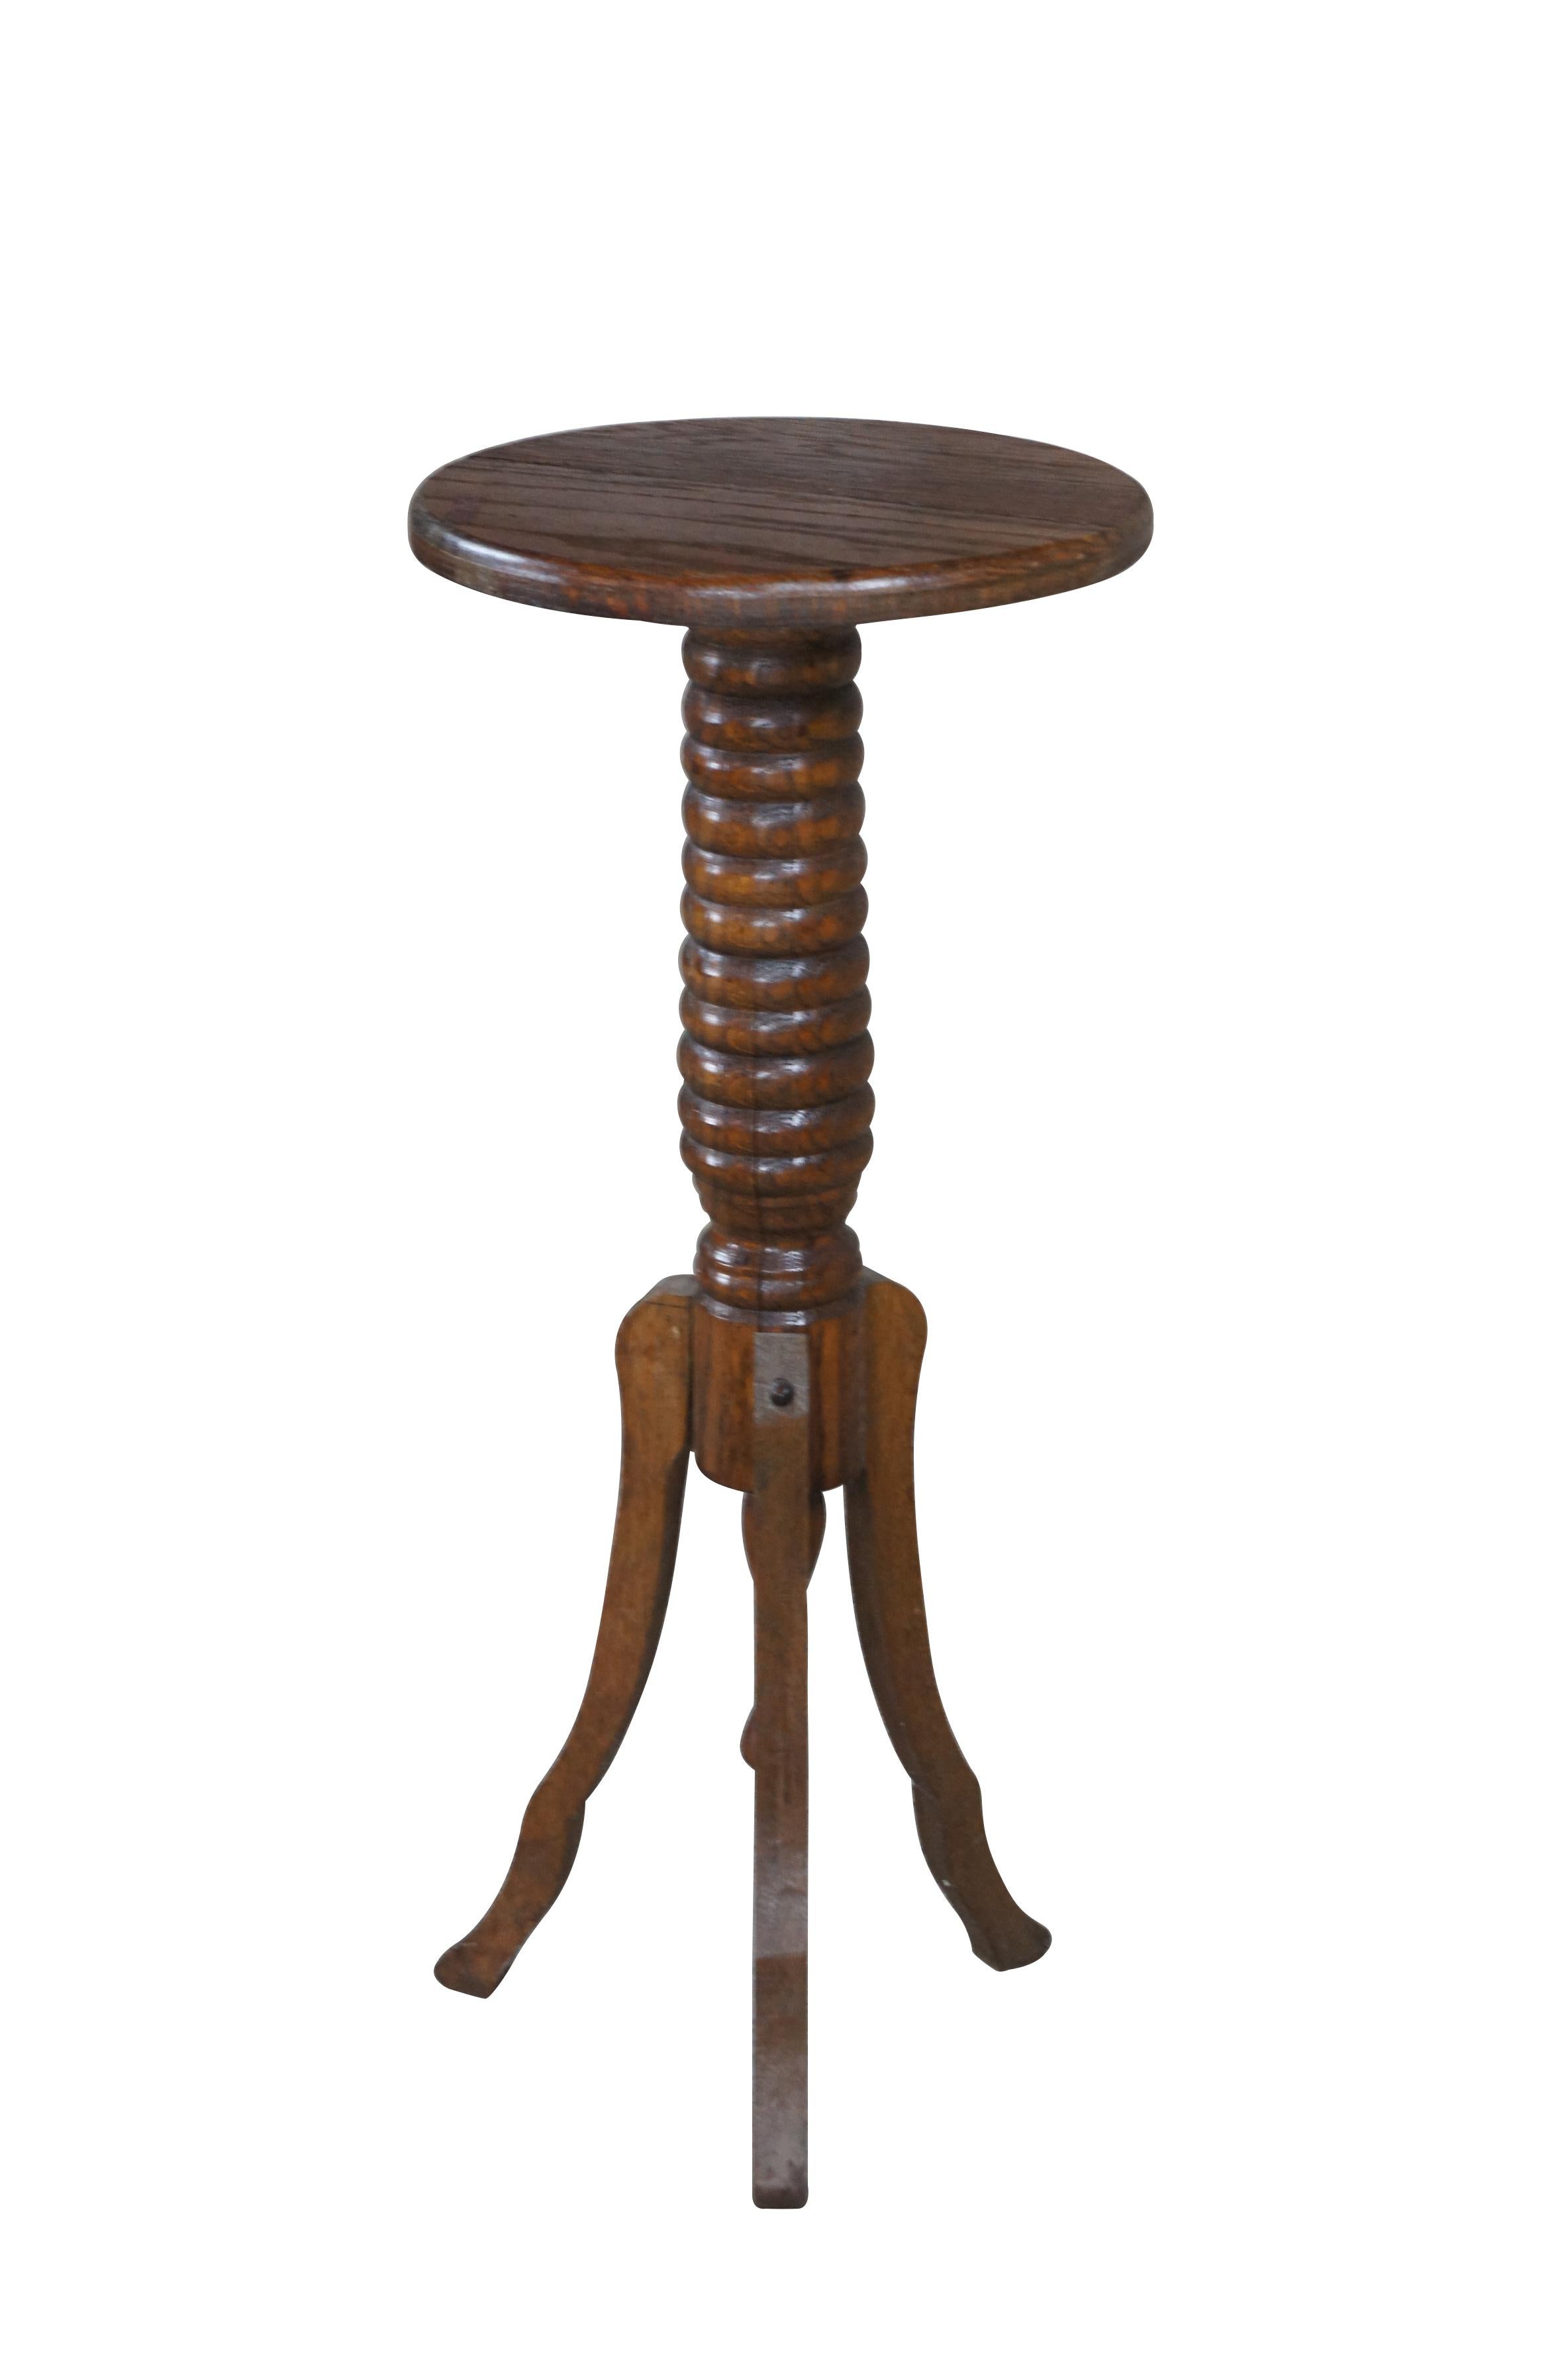 An early 20th century pedestal, plant / sculpture stand.  Made from oak with a round top over a turned and ribbed support leading to a tripod base.  Includes turned down finial.

Dimensions:
12.5